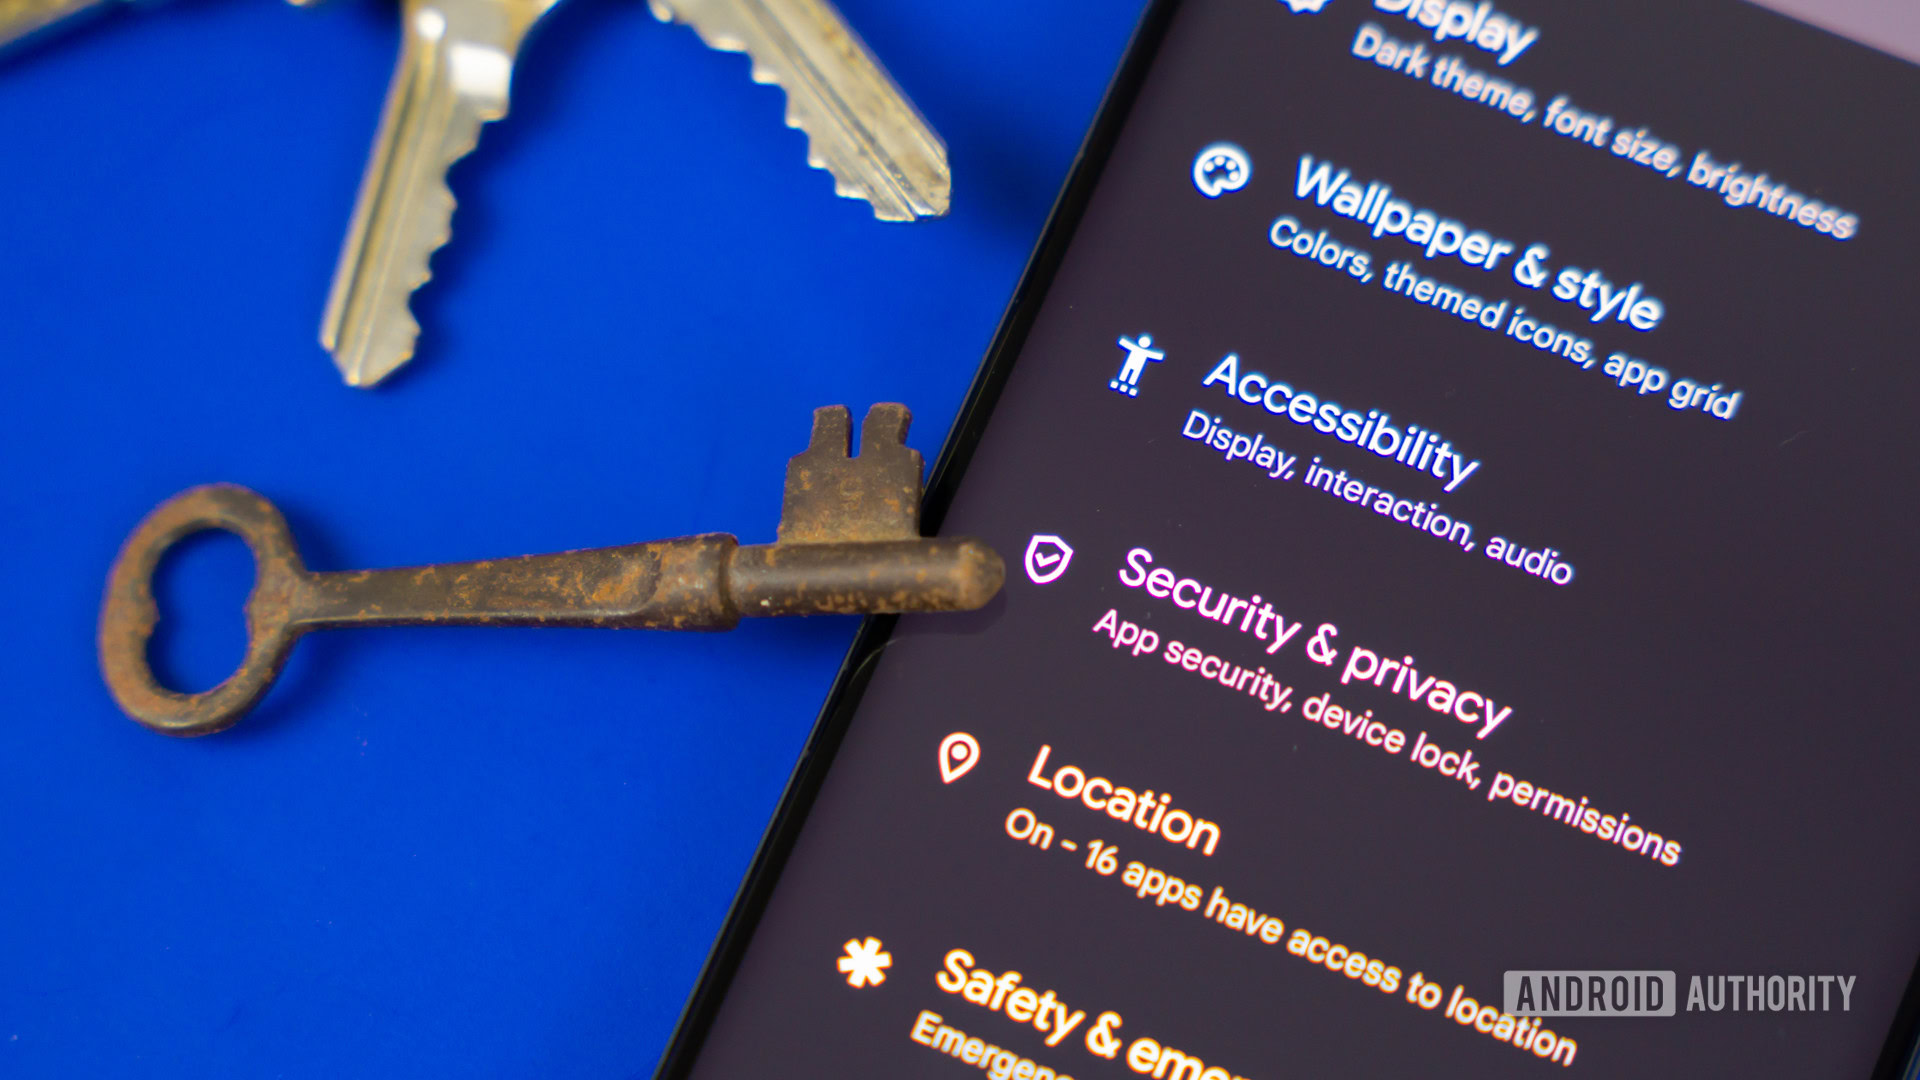 Security and privacy option in Android settings stock photo 2